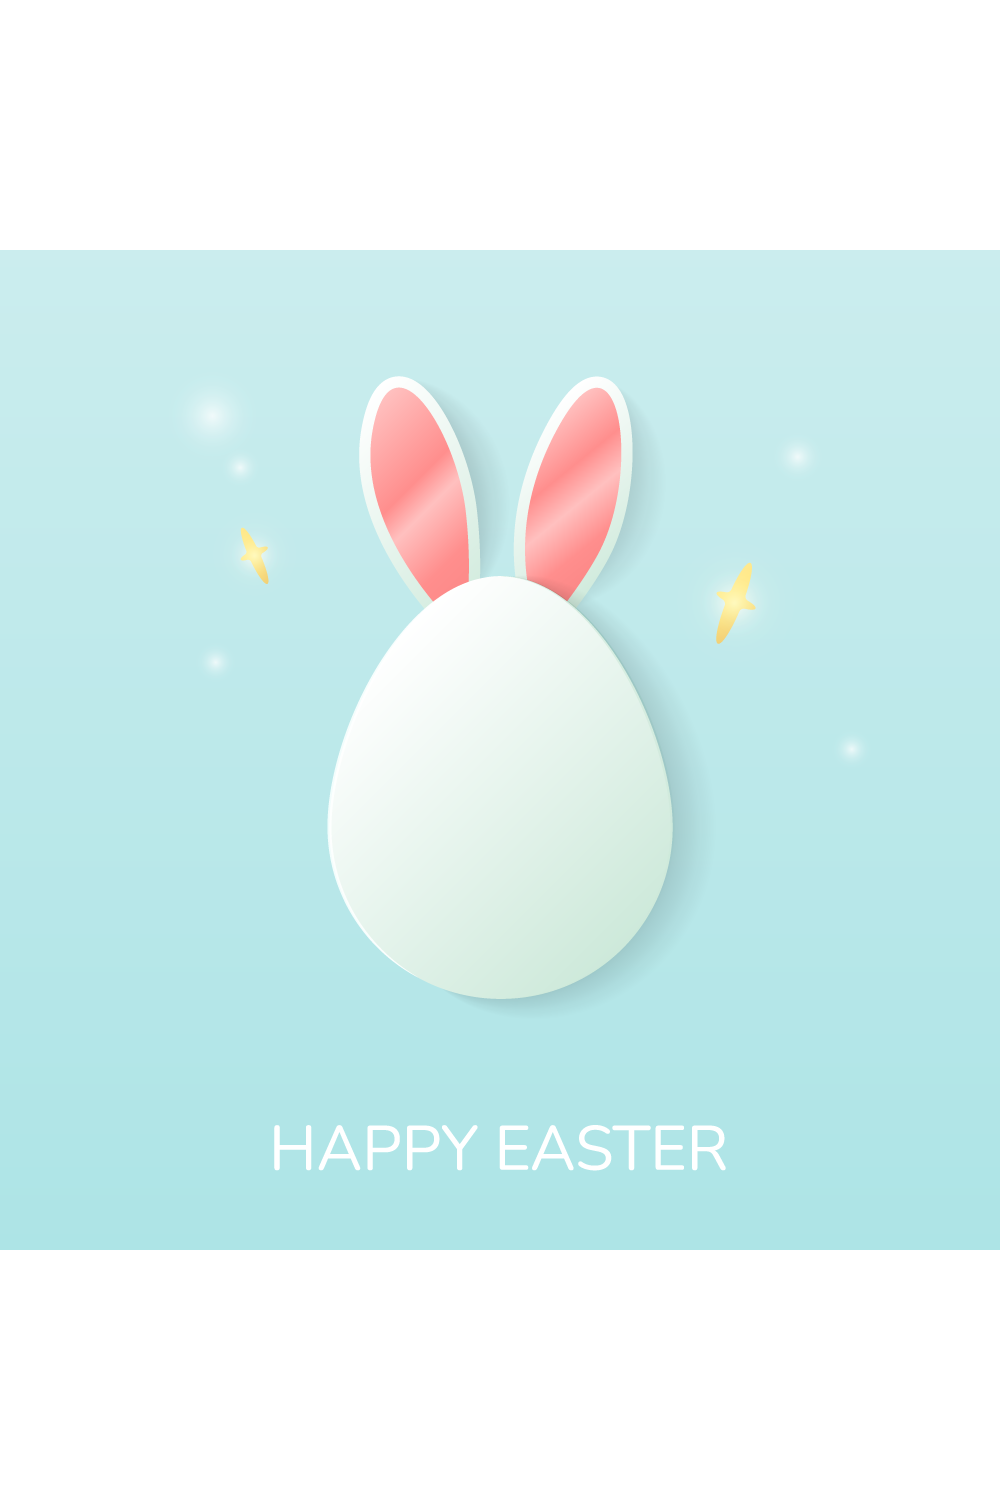 Happy Easter background set with colorful eggs, text and flares Magical Vector illustration for banner, poster, card, sale pinterest preview image.